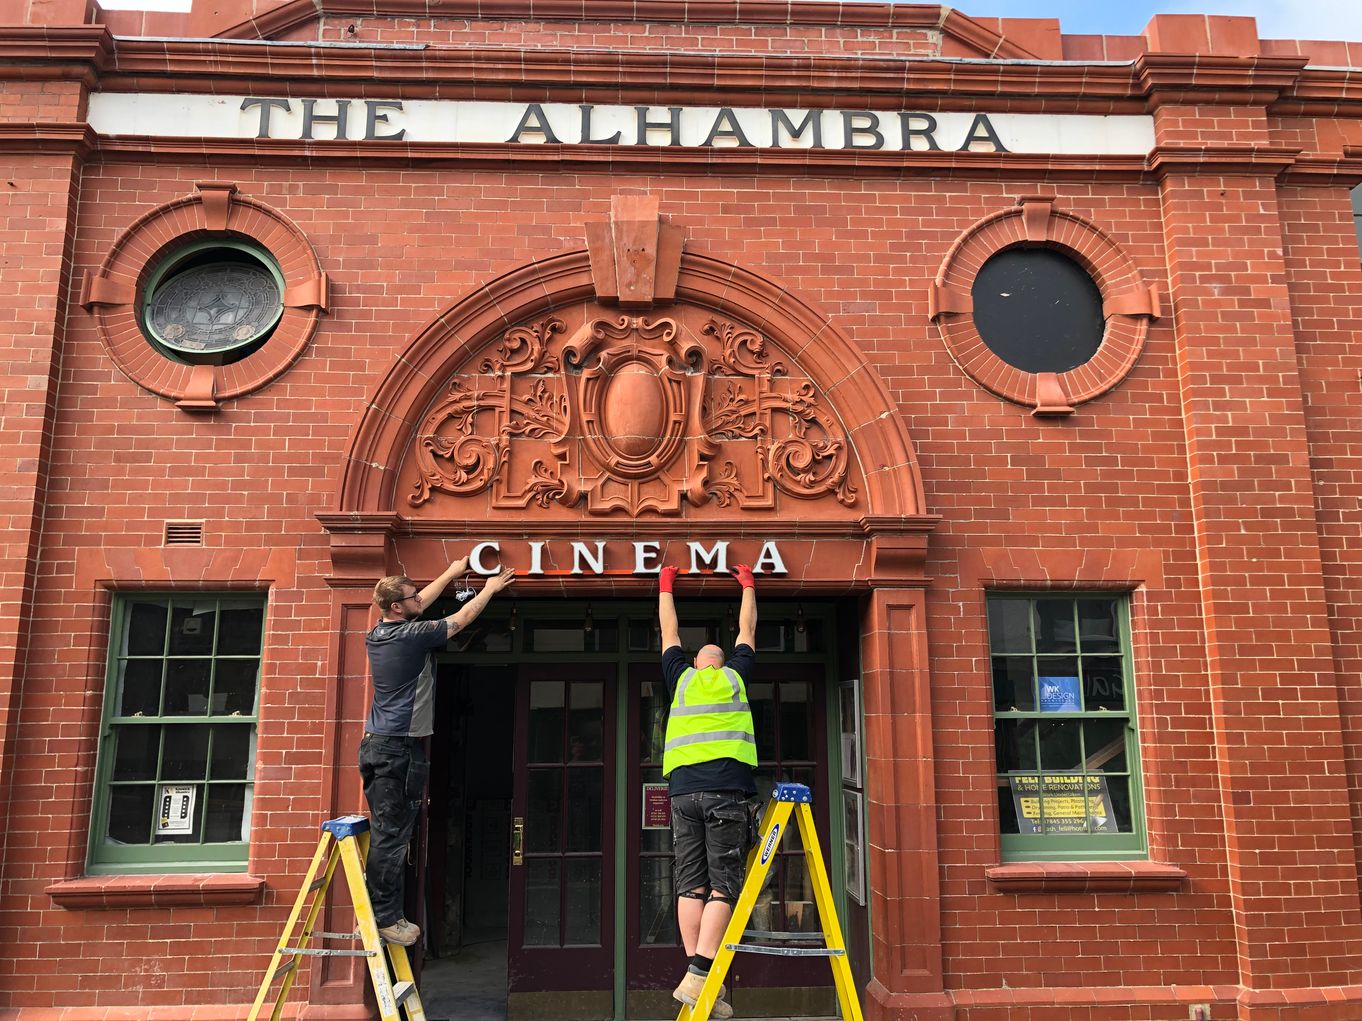 Cinema signage being reinstated on th front of the building